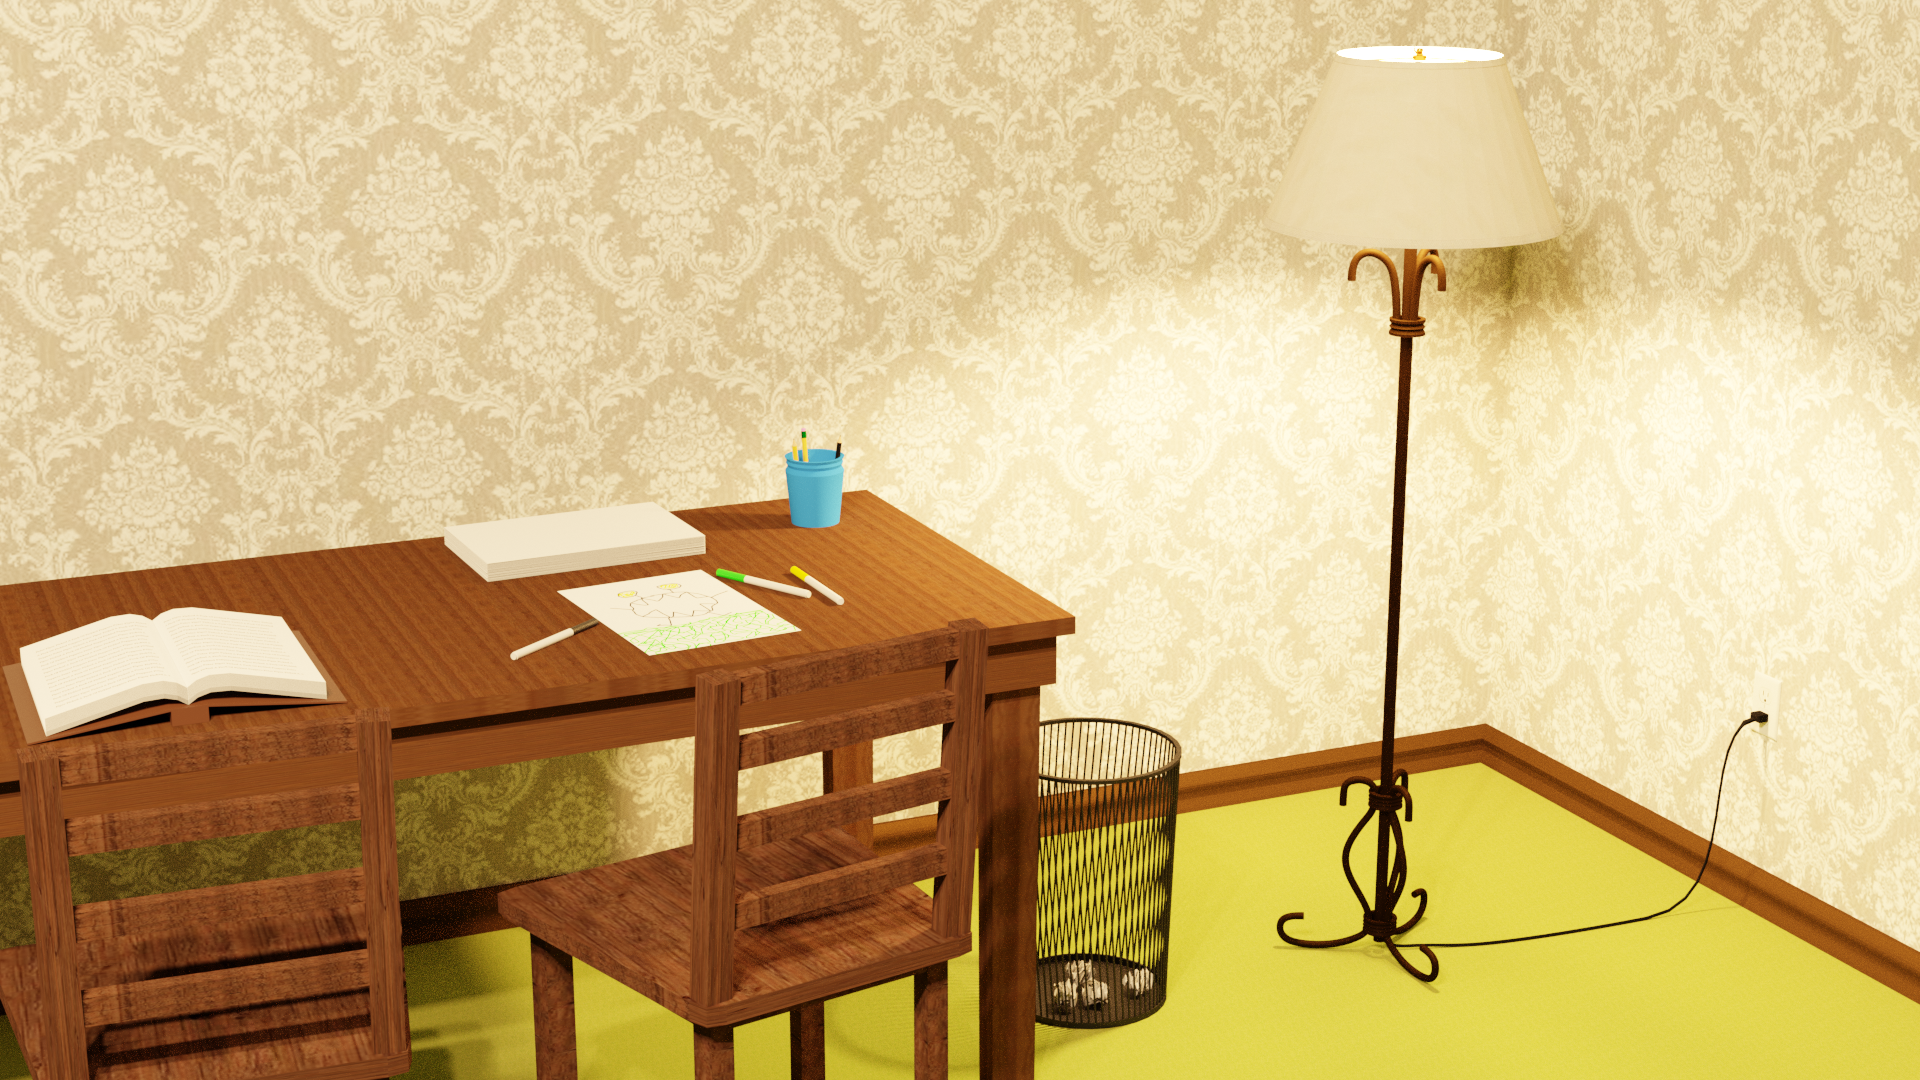 Lamp and desk preview image 1